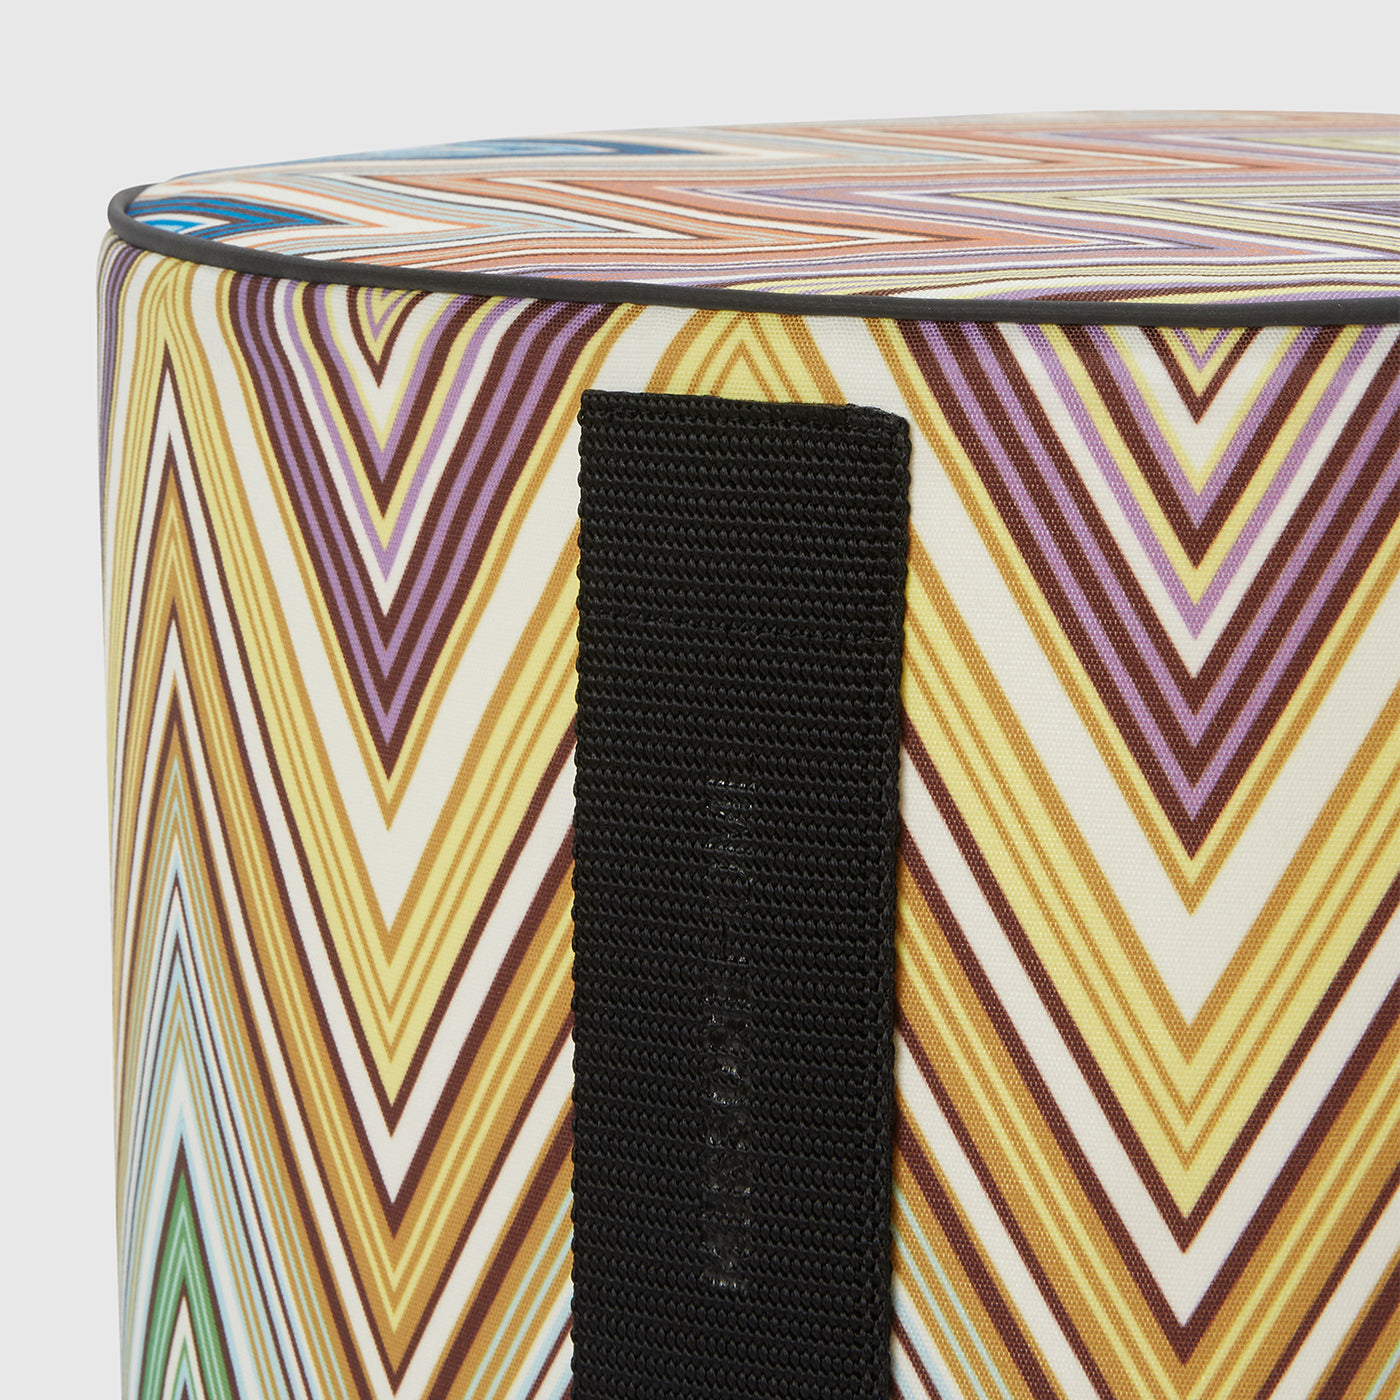 Kew Cylindrical Zigzag Pattern Outdoor Pouf #3 - Alternative view 1